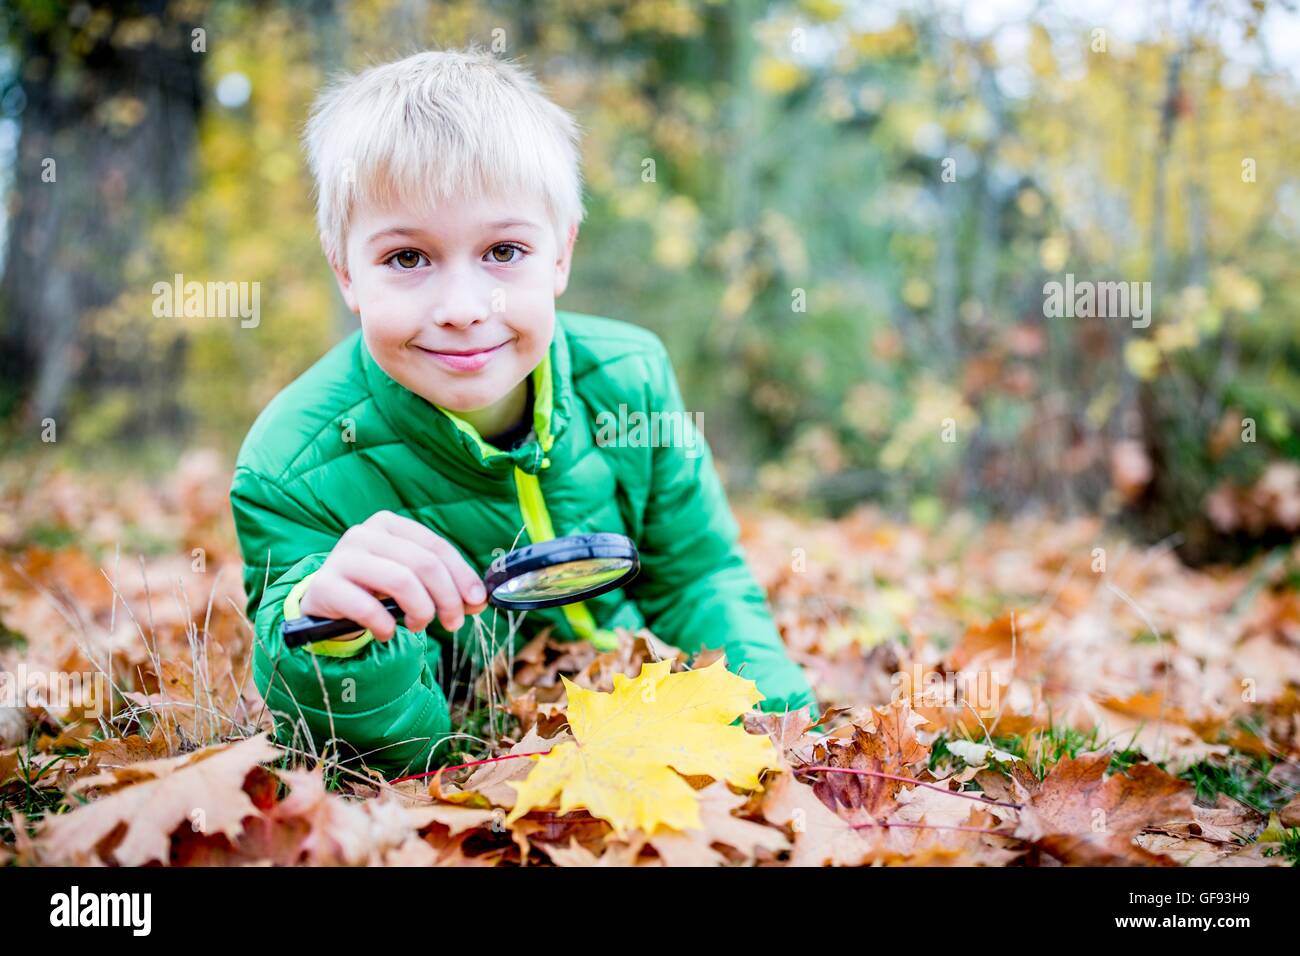 MODEL RELEASED. Boy holding magnifying glass over autumn leaf, smiling, portrait. Stock Photo